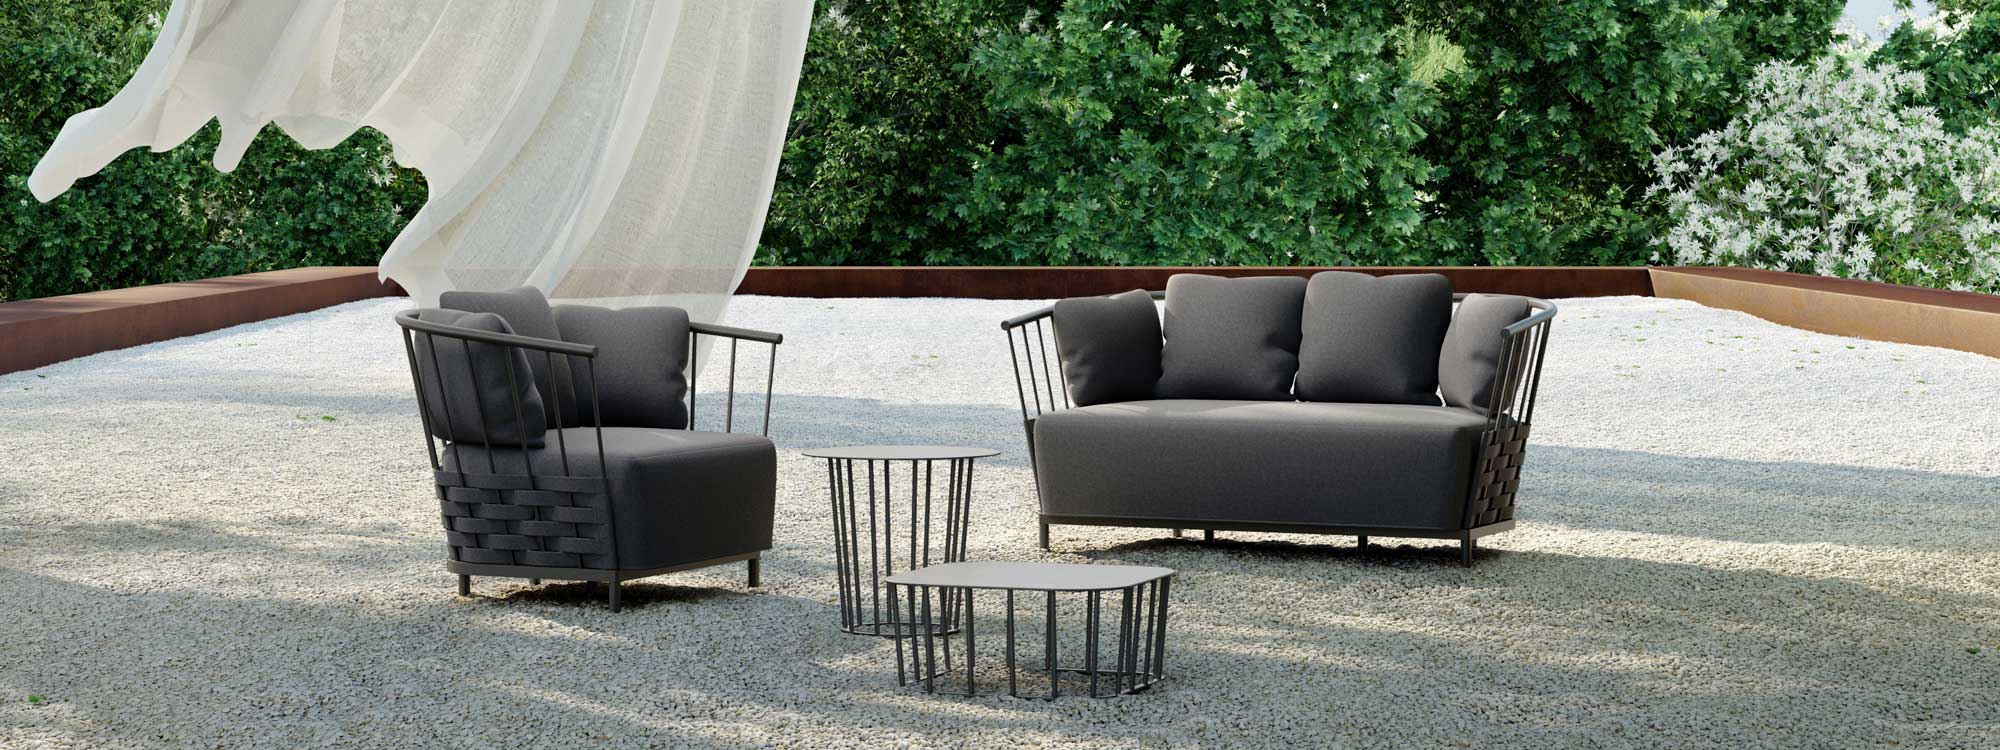 Image of Oiside Panama contemporary 2 seater garden sofa and lounge chair on gravel terrace, with shrubs and trees in the background